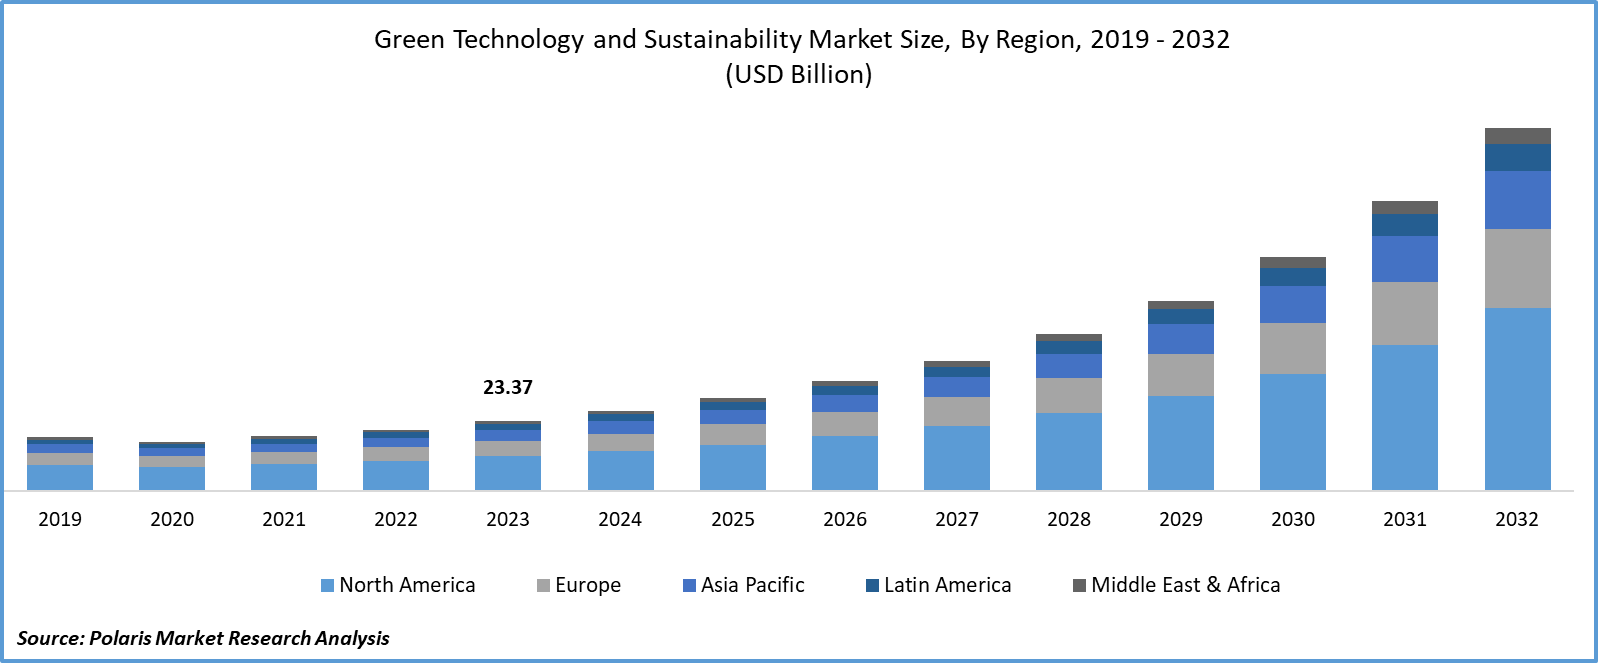 Green Technology and Sustainability Market Size